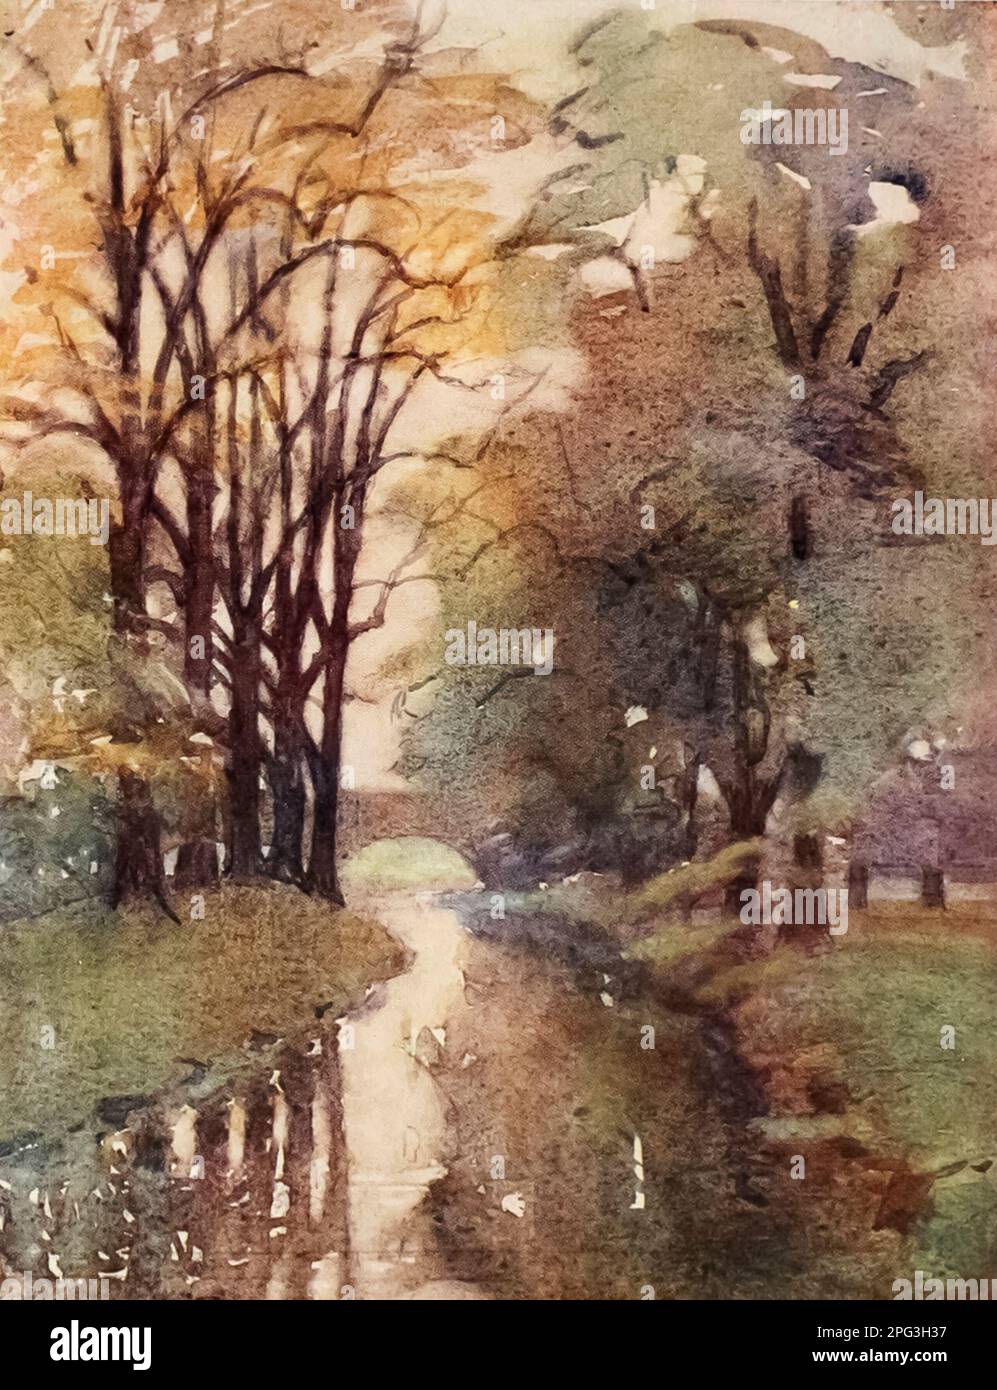 Jordan from Sheep's Bridge in the Playing-Fields Looking towards Fifteen Arch Bridge and the Slough Road. Watercolour by Edith Danvers Brinton, from the book ' Eton ' By Christopher Reynolds Stone,  Published in London by A. & C. Black in 1909. Eton College is a public school in Eton, Berkshire, England. It was founded in 1440 by Henry VI under the name Kynge's College of Our Ladye of Eton besyde Windesore Stock Photo